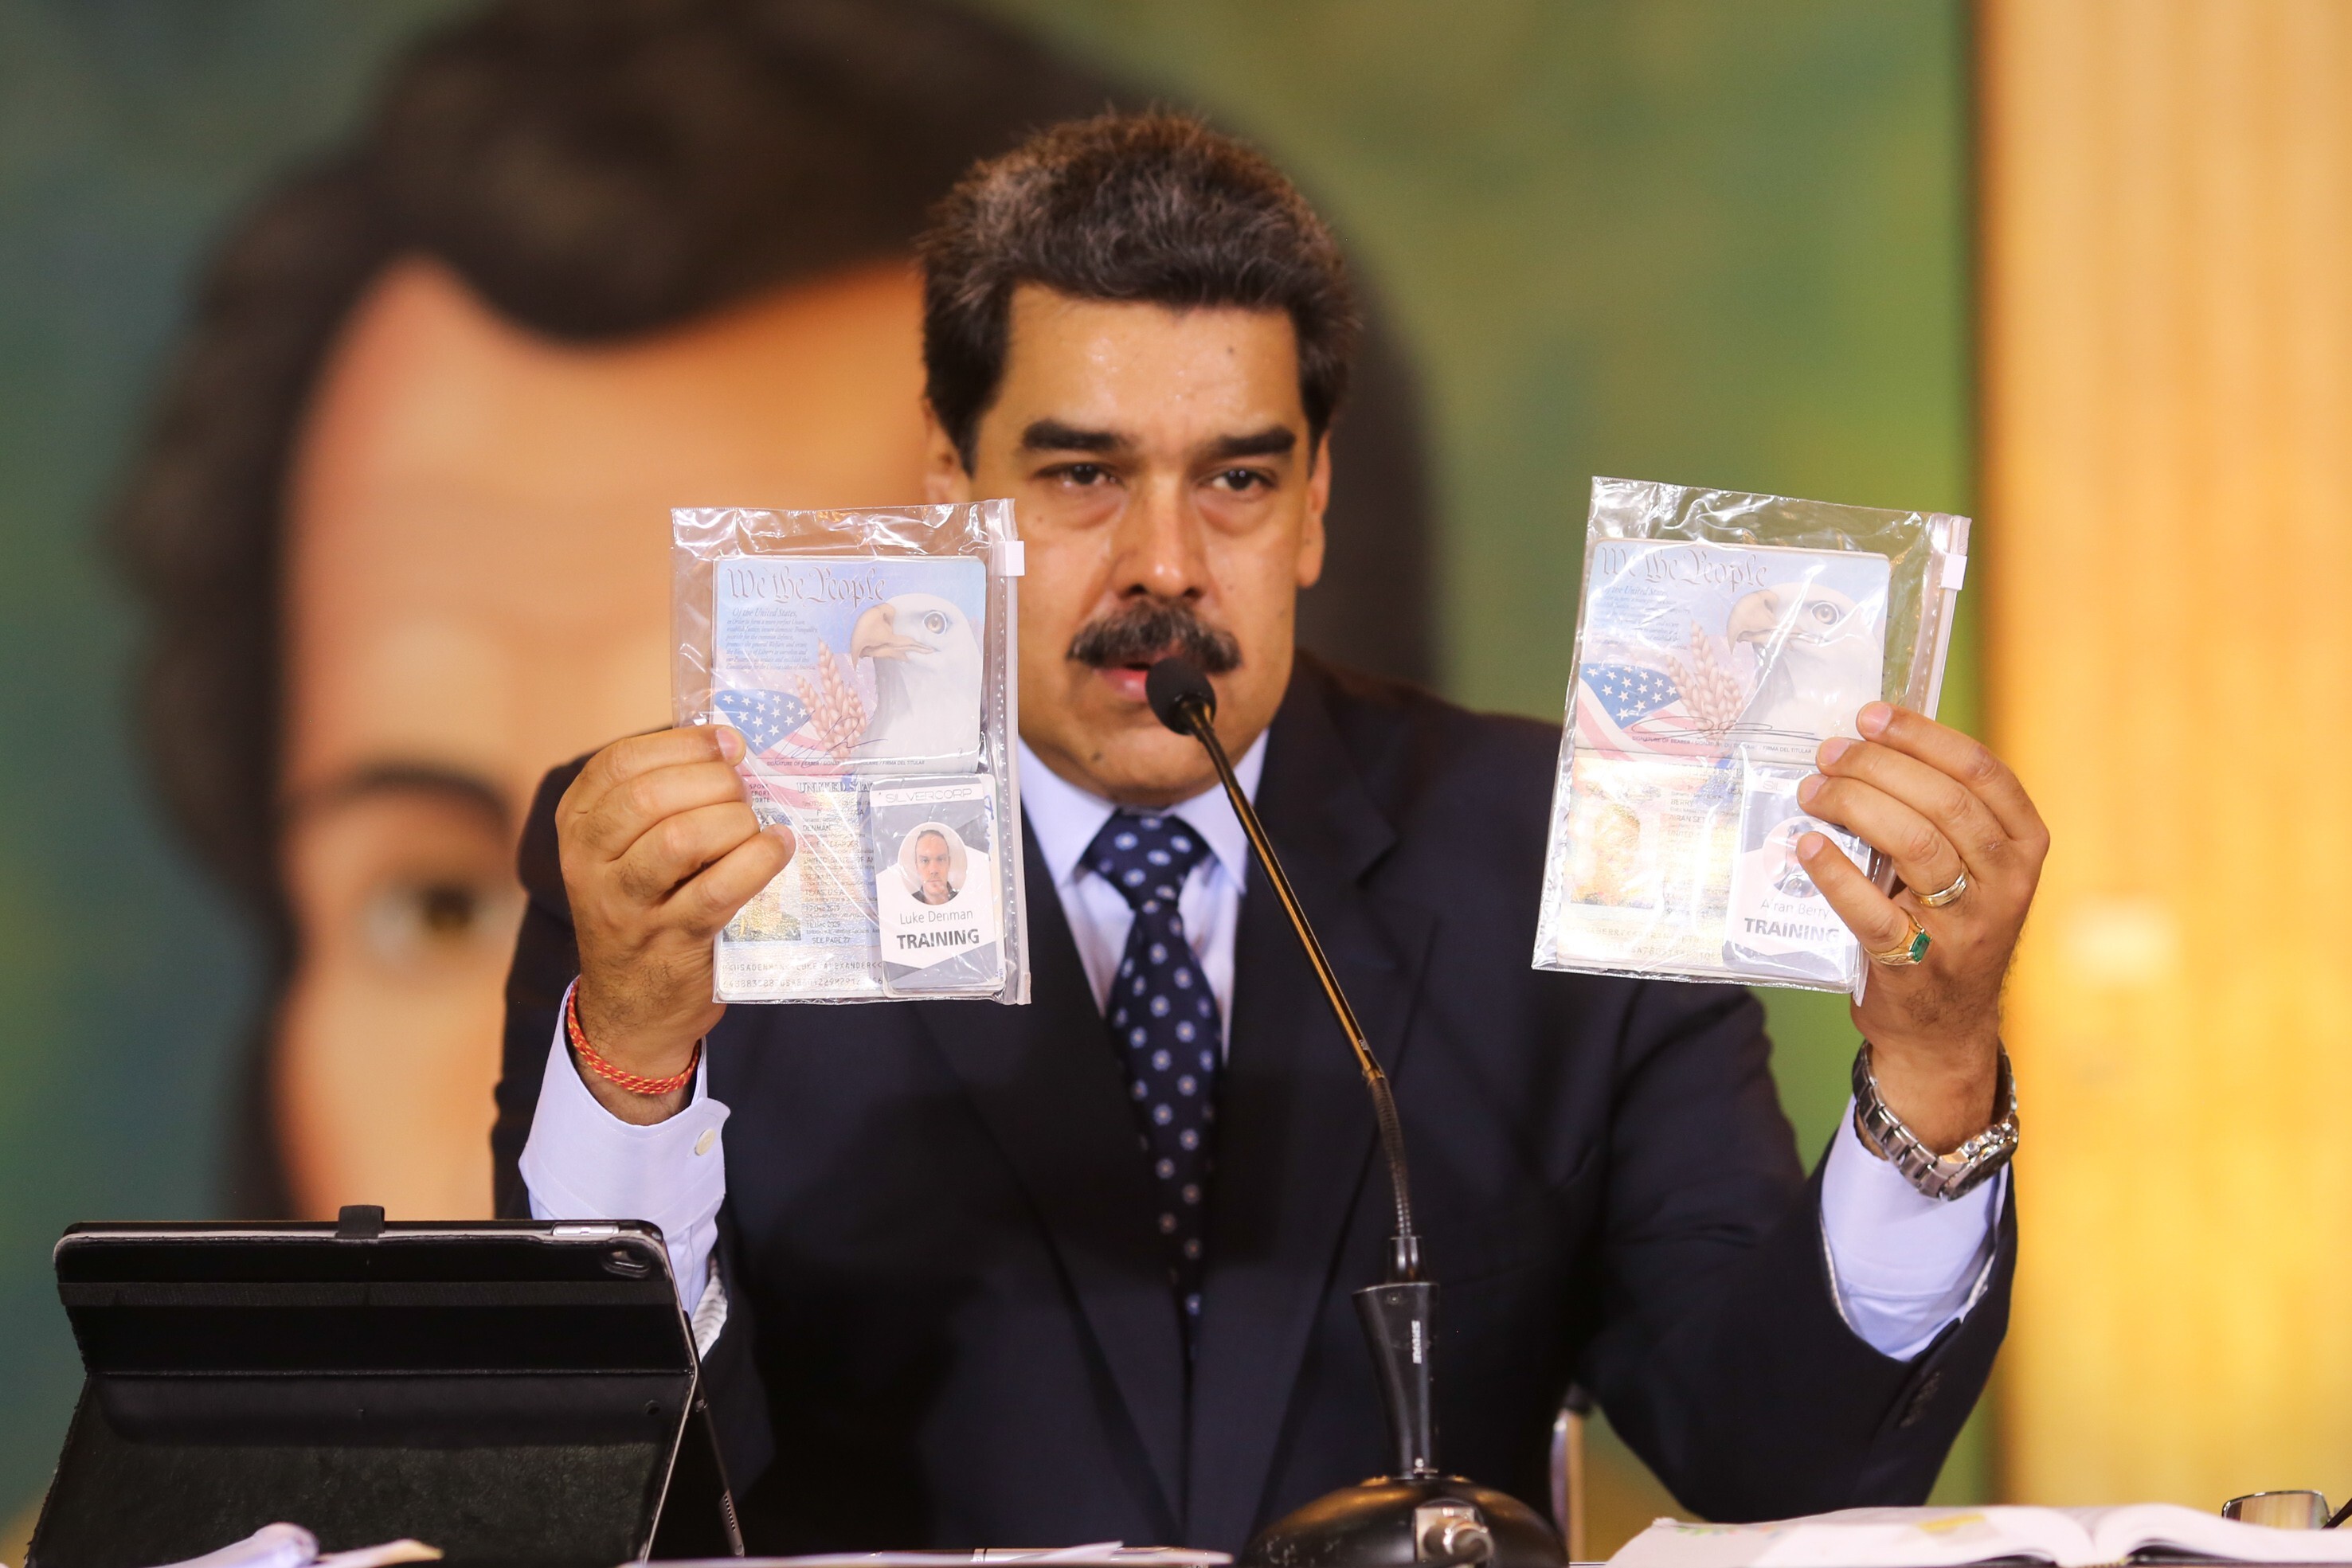 Venezuela’s President Nicolas Maduro shows what Venezuelan authorities claim are identification documents of US citizens Airan Berry and Luke Denman during an online press conference in Caracas on Wednesday. Photo: Miraflores Palace presidential press office via AP